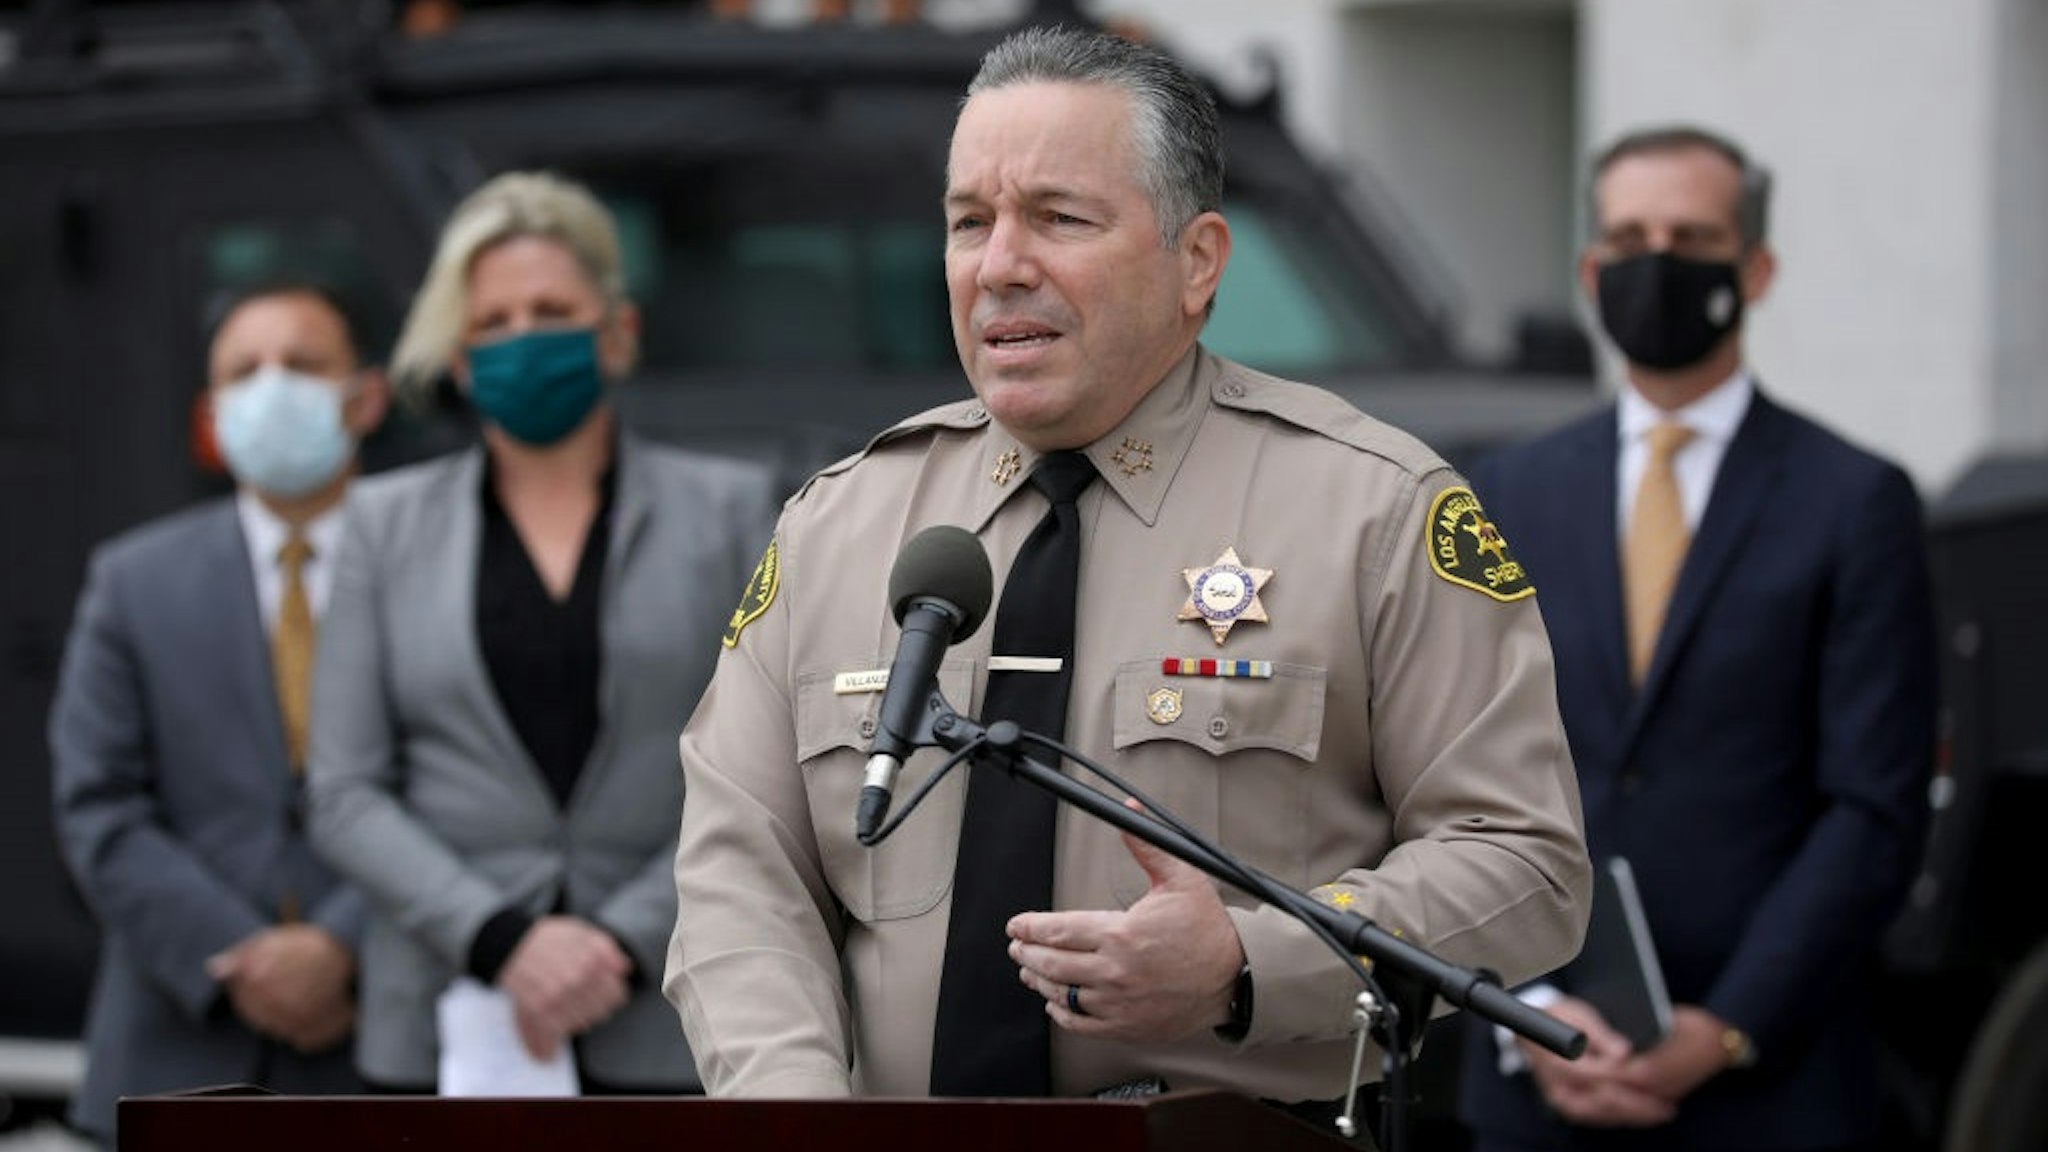 LOS ANGELES, CA - JANUARY 19: Los Angeles County Sheriff Alex Villanueva at a news conference to discuss public safety preparedness for potential responses to the presidential inauguration, held at the Hall of Justice on Tuesday, Jan. 19, 2021.